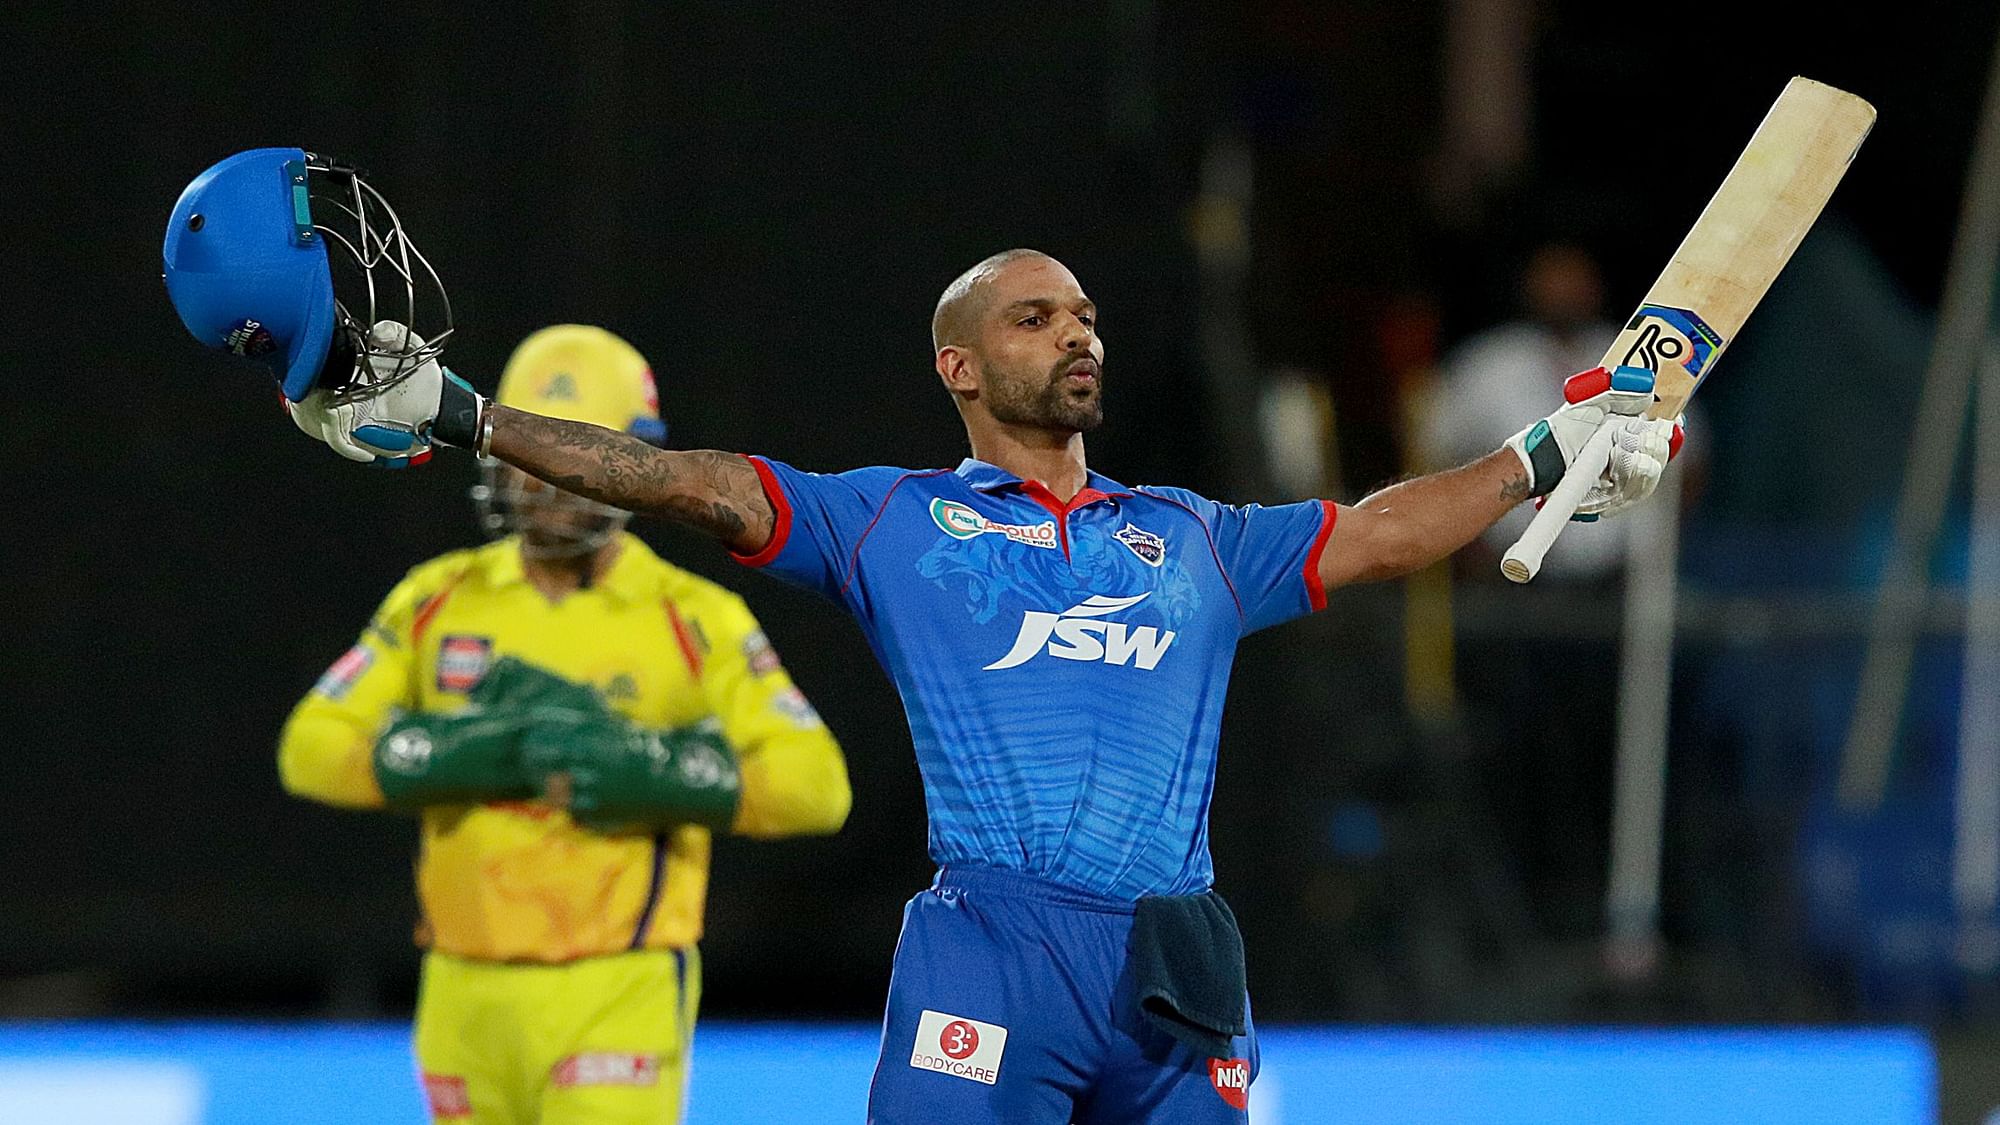 Opener Shikhar Dhawan smashed his maiden century in the Indian Premier League as Delhi Capitals defeated Chennai Super Kings.